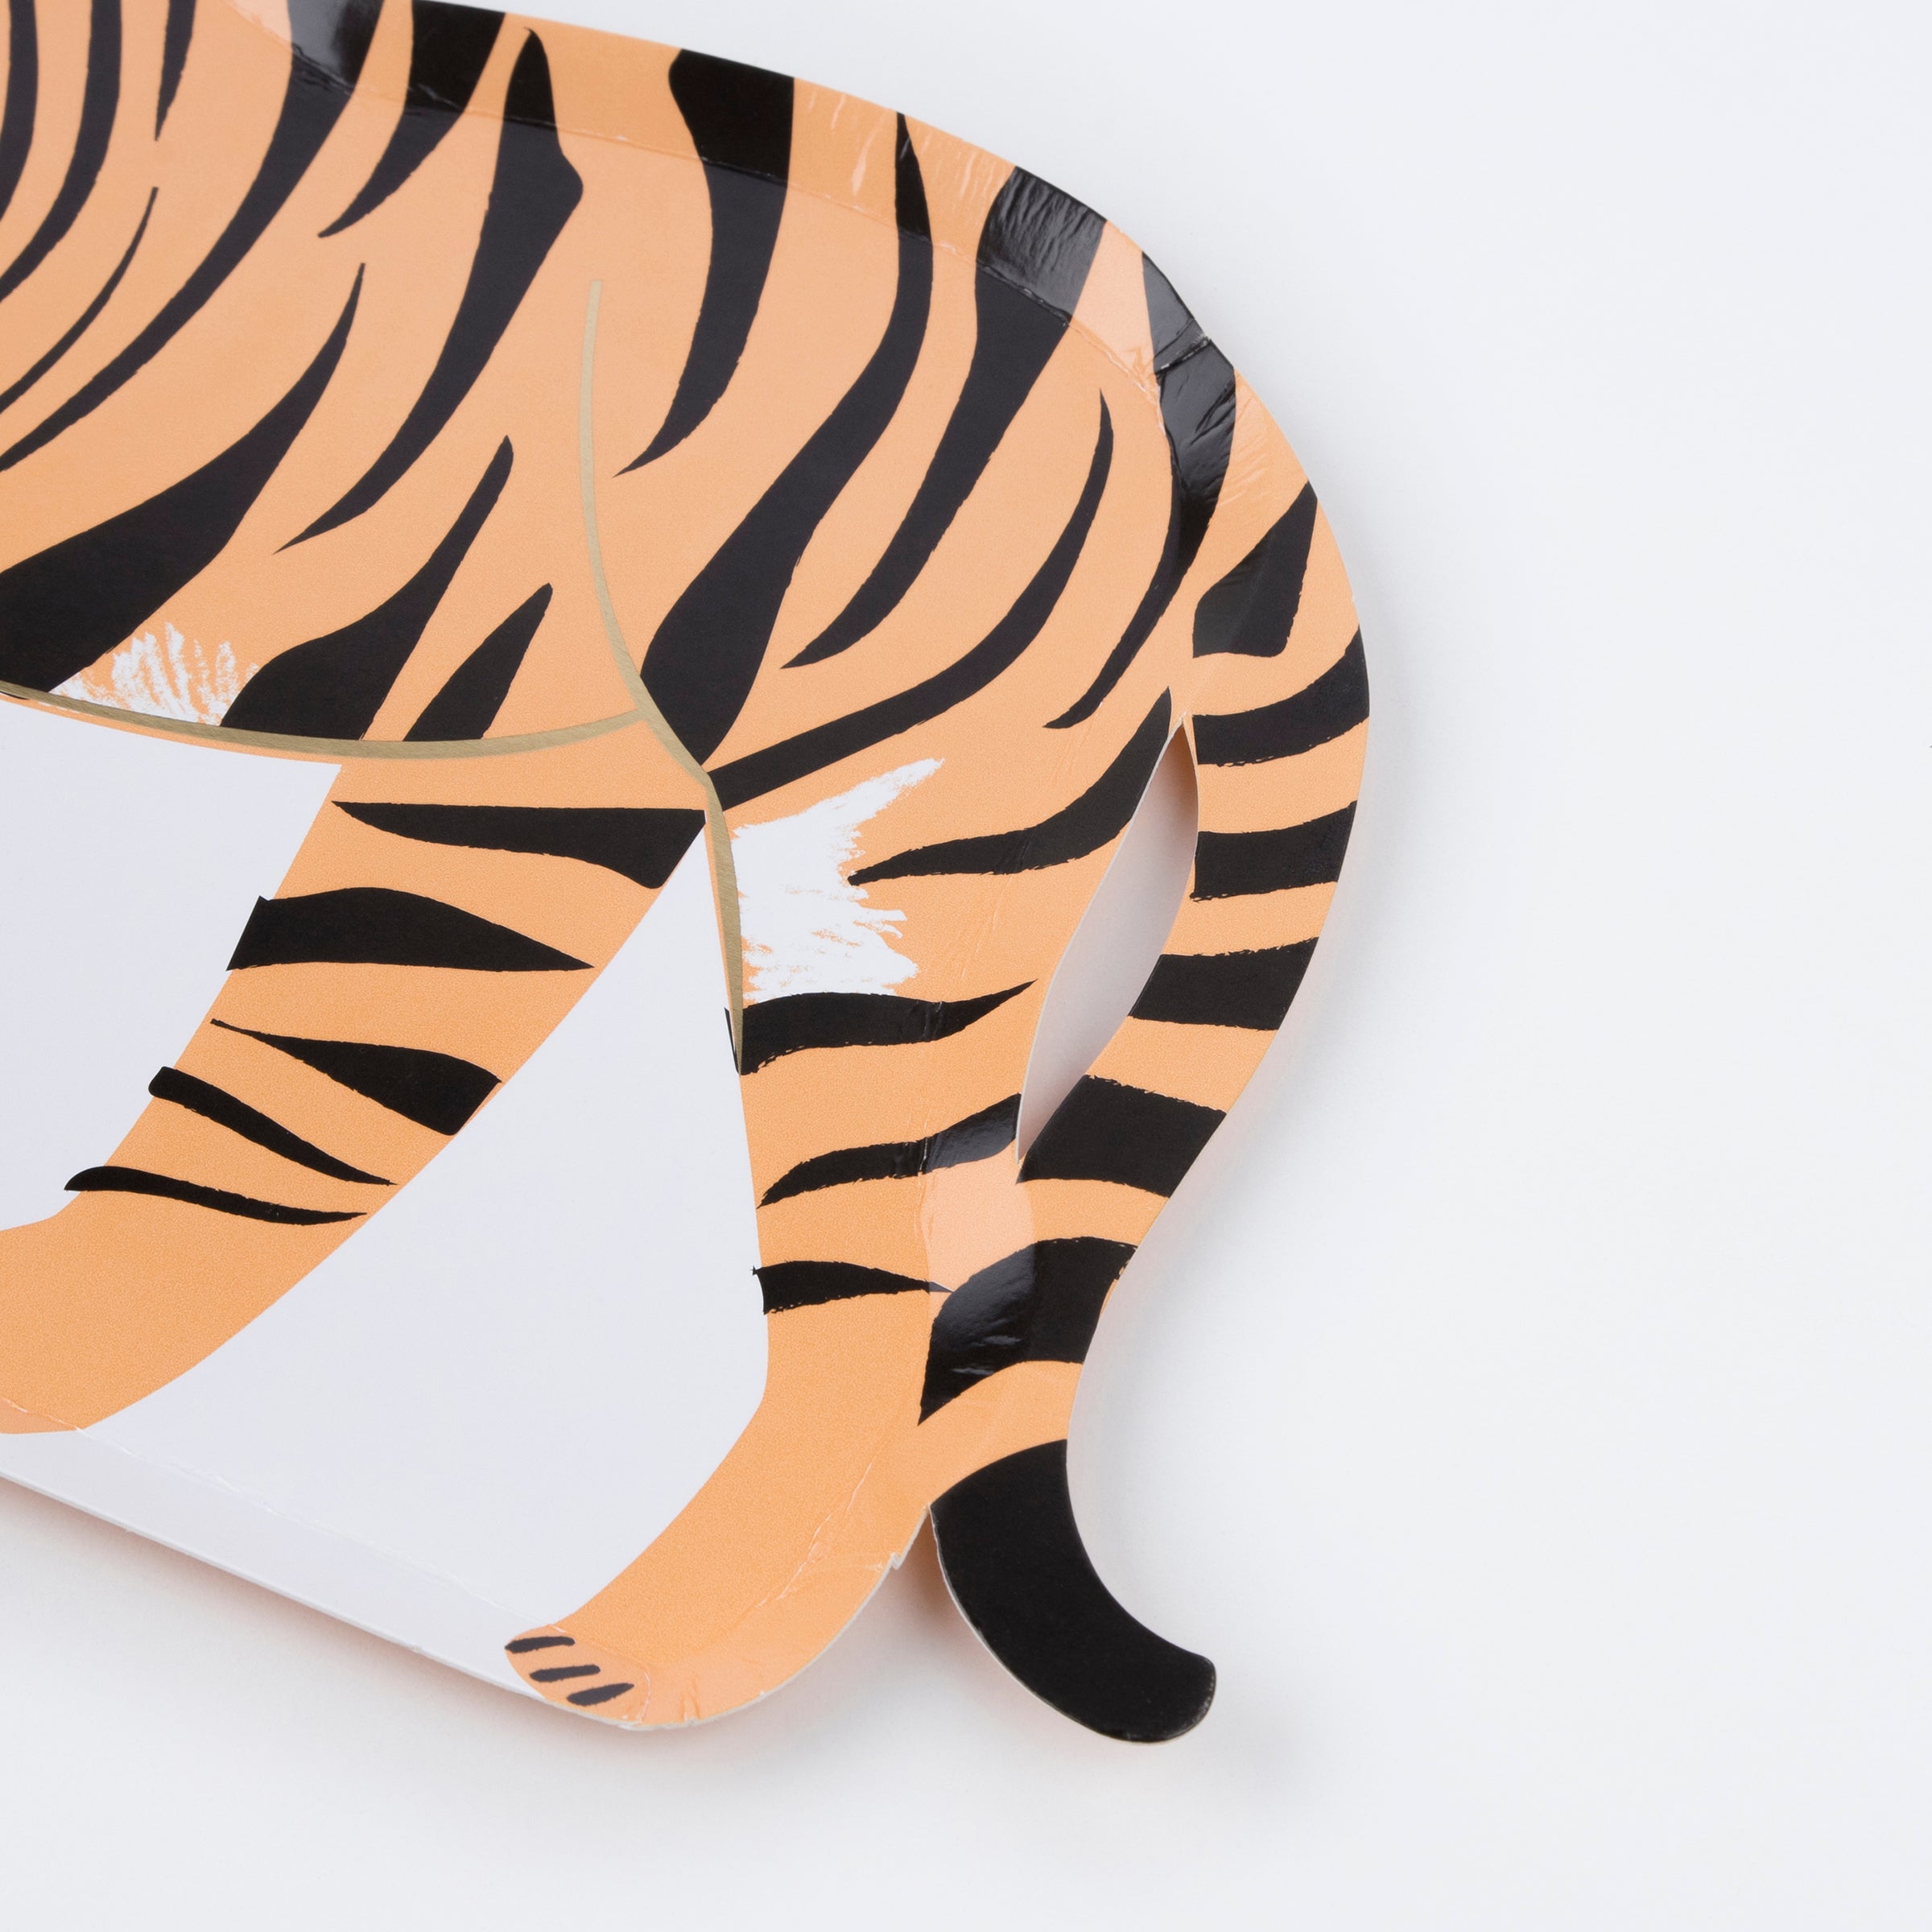 Make your safari birthday party look amazing with our party plates, in the shapes of tigers.